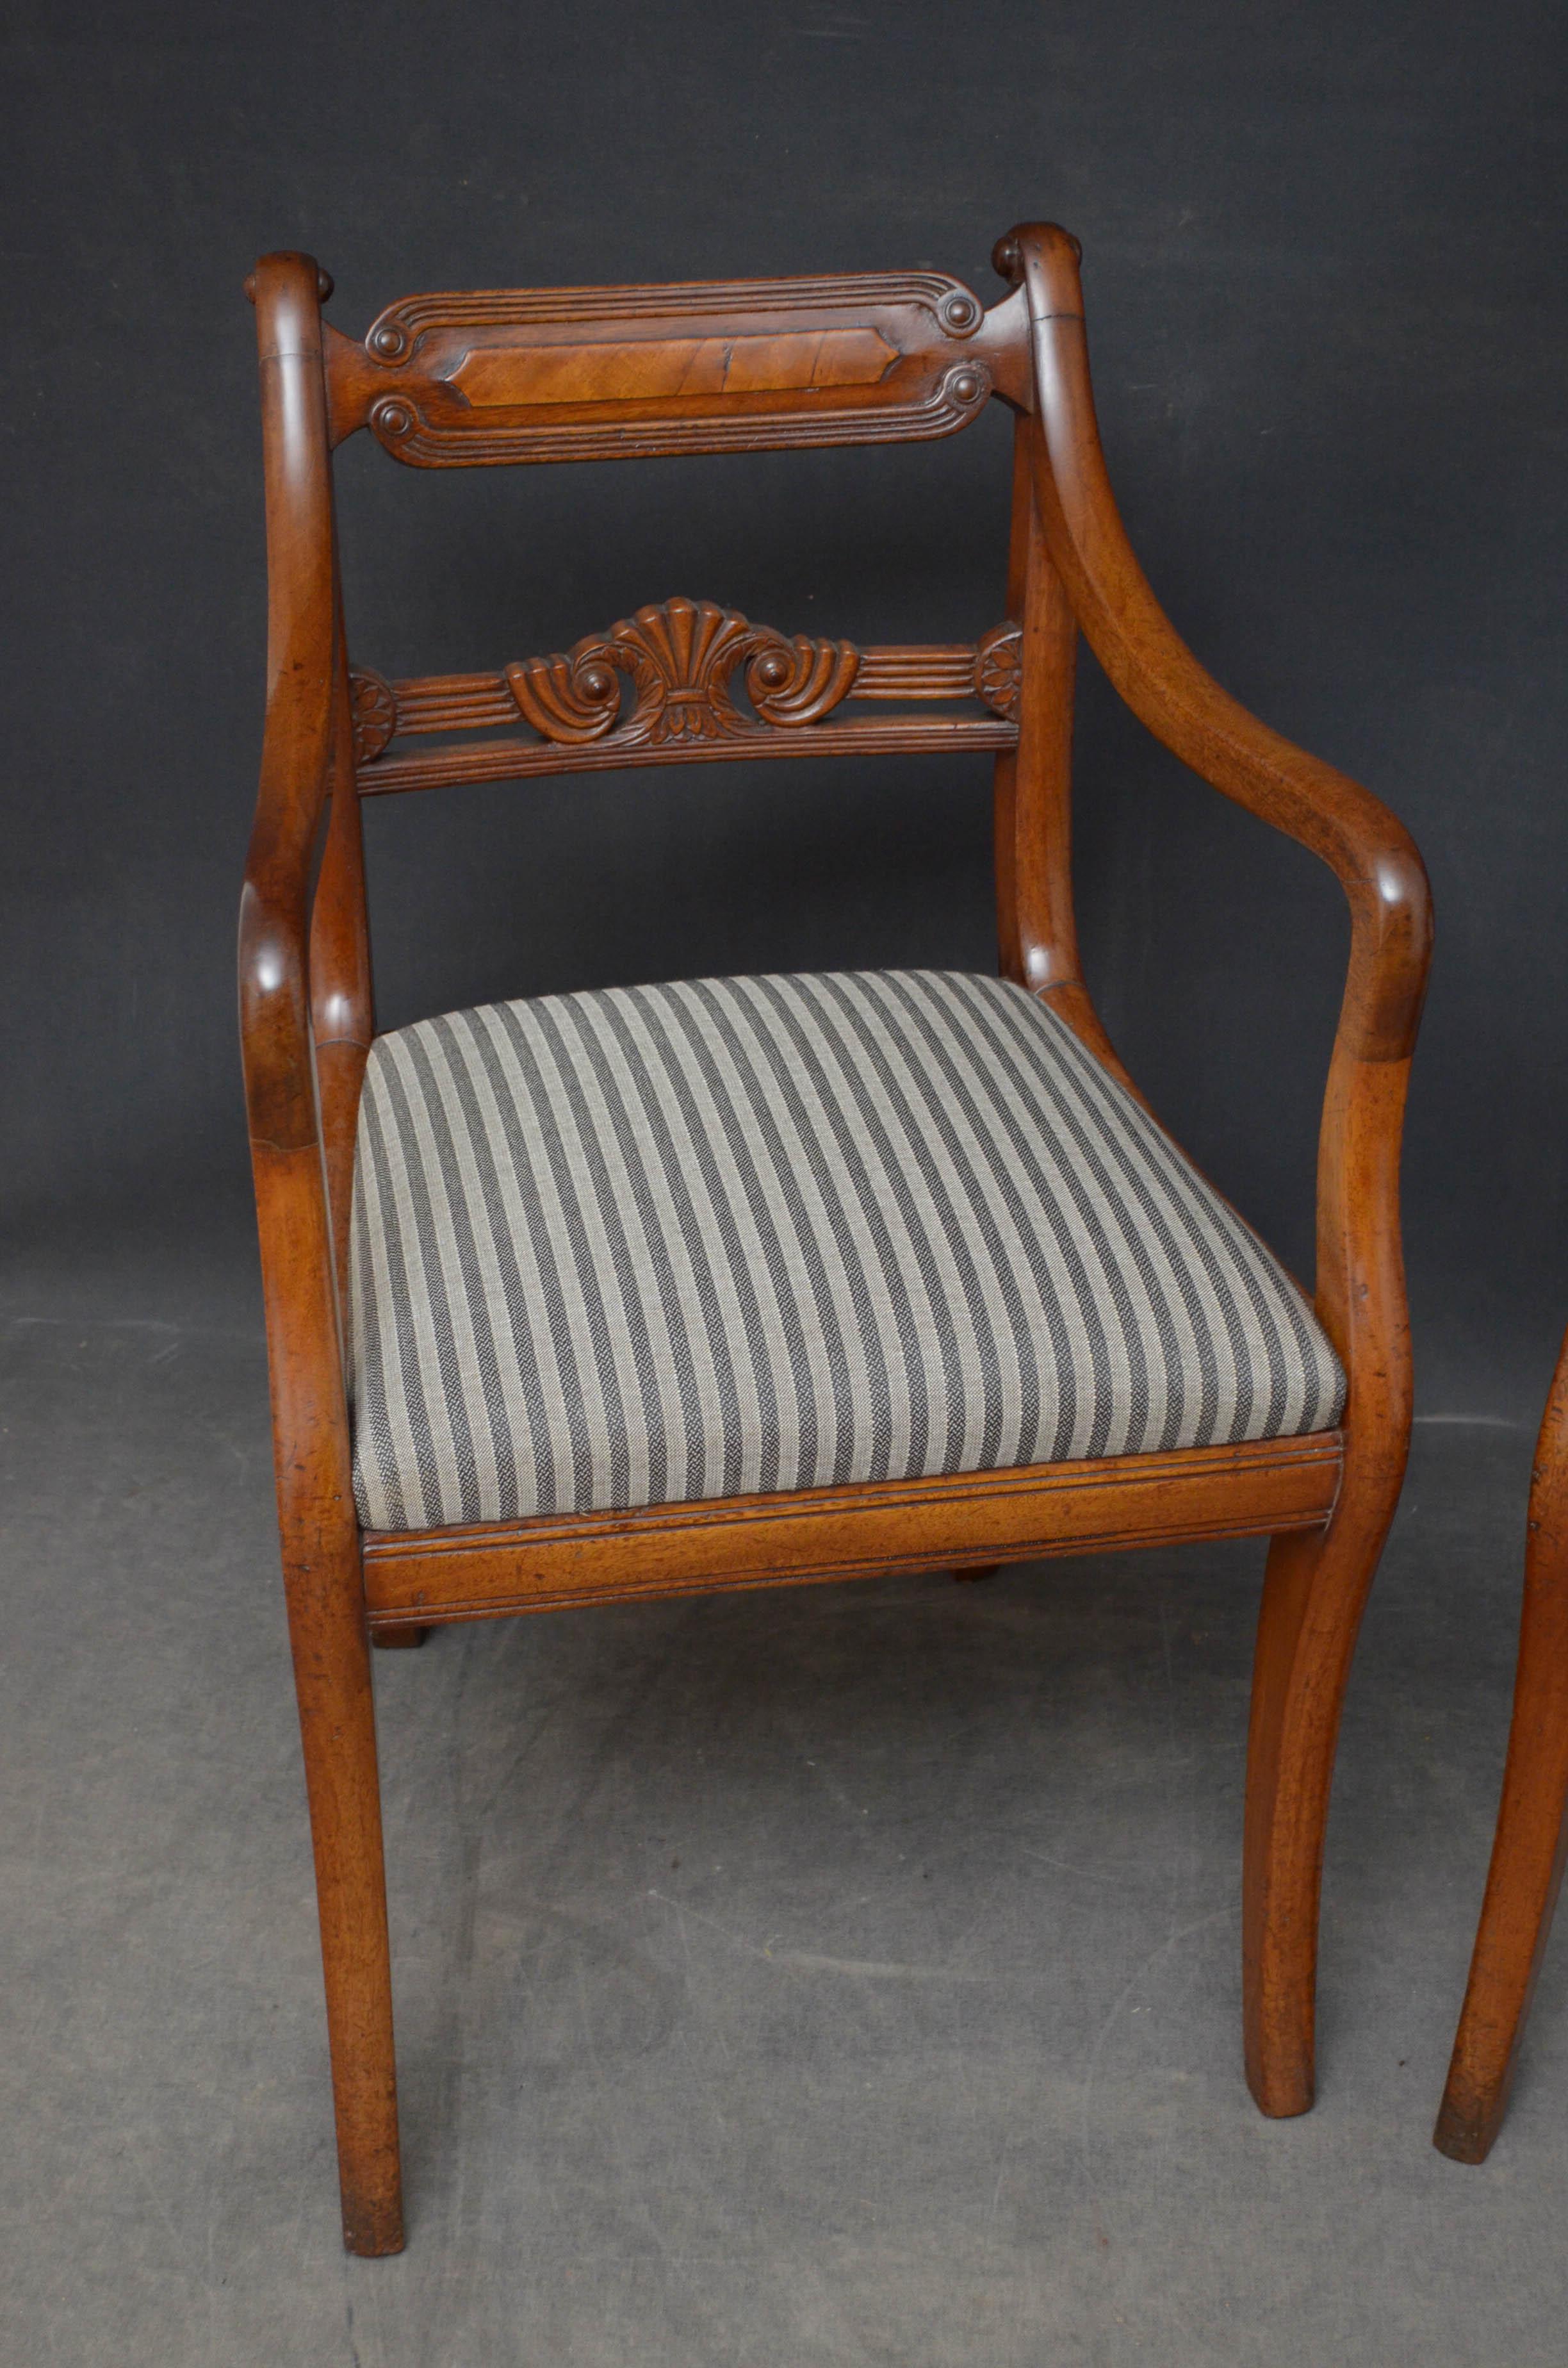 Sn4785 Fine quality Regency elbow chairs in mahogany, each having shaped and reeded top rail above finely carved mid rails, newly upholstered drop in seat and open arms, standing on sabre legs. This pair of antique carves retains its original finish